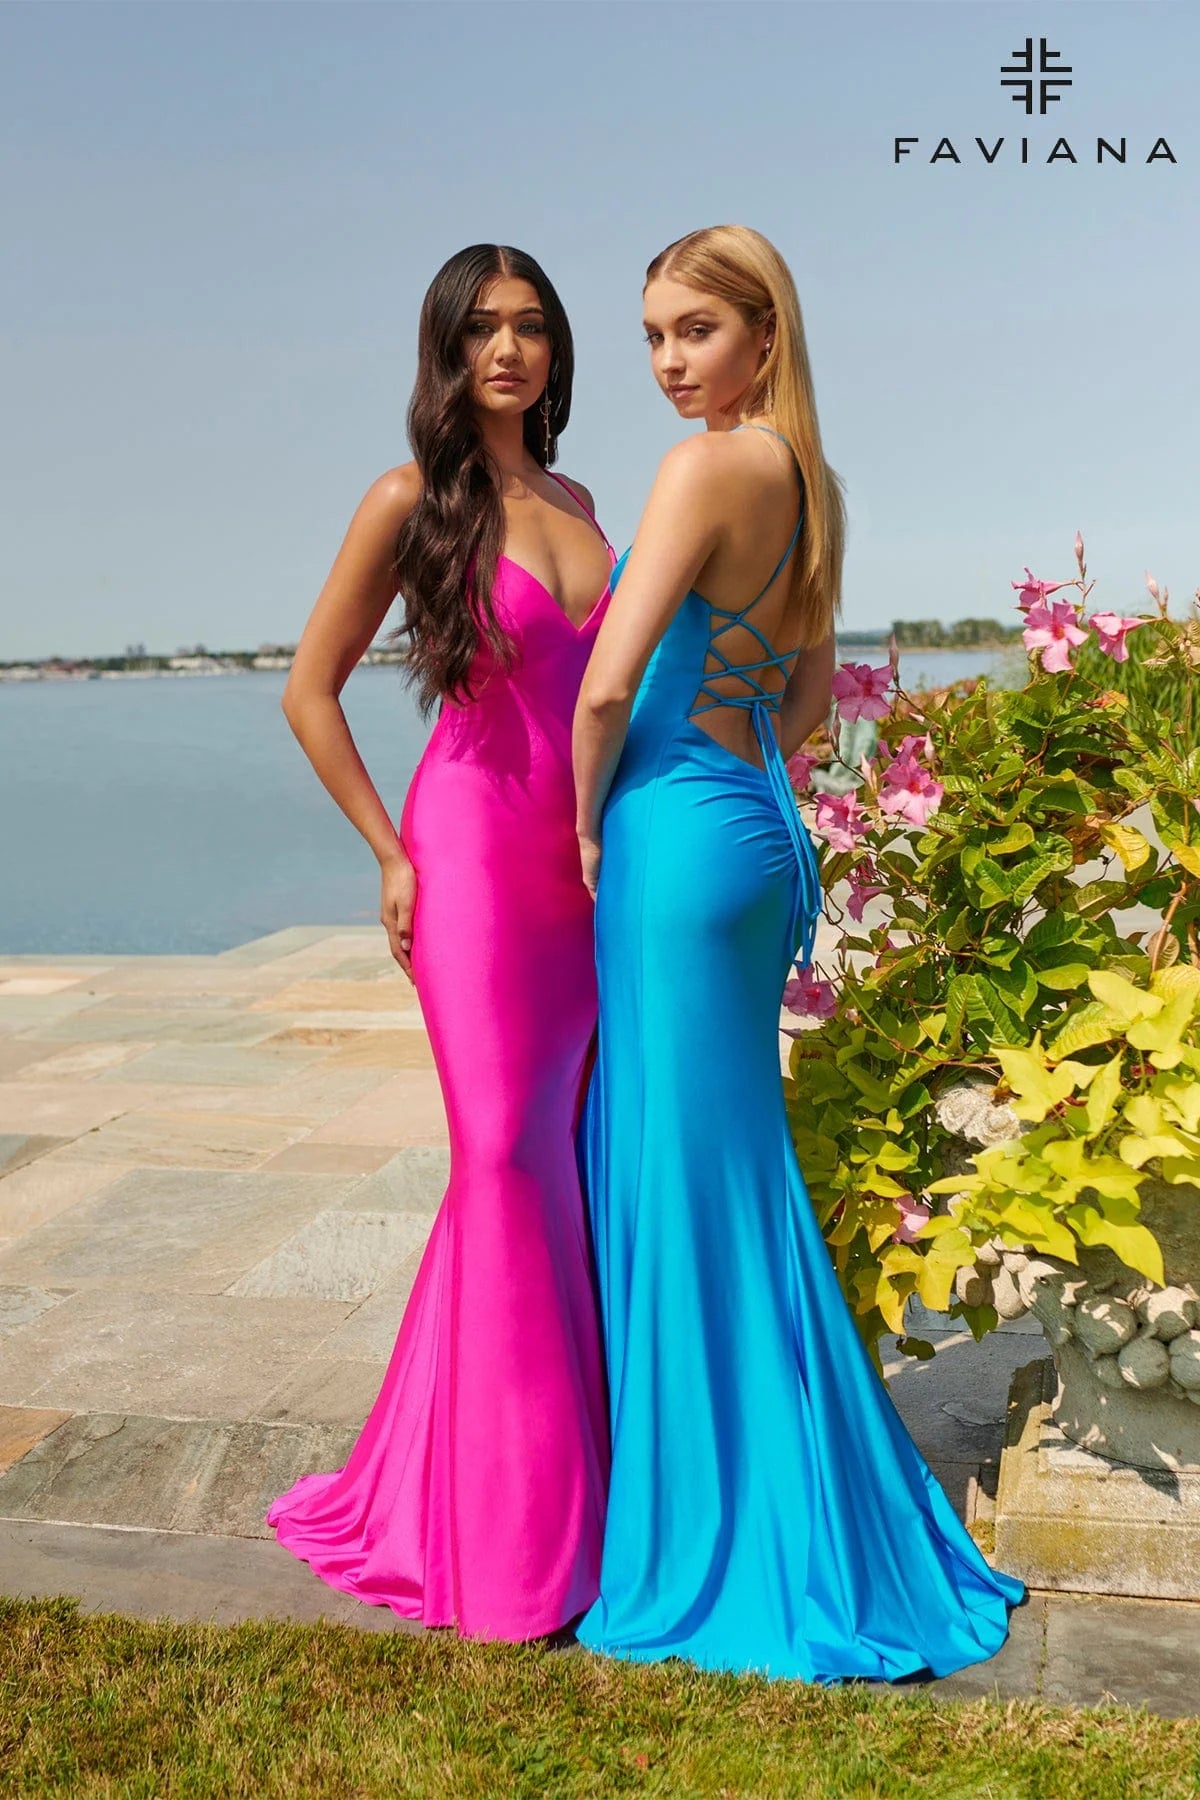 V Neckline Prom Dress With Stretch Fabric And Corset Back